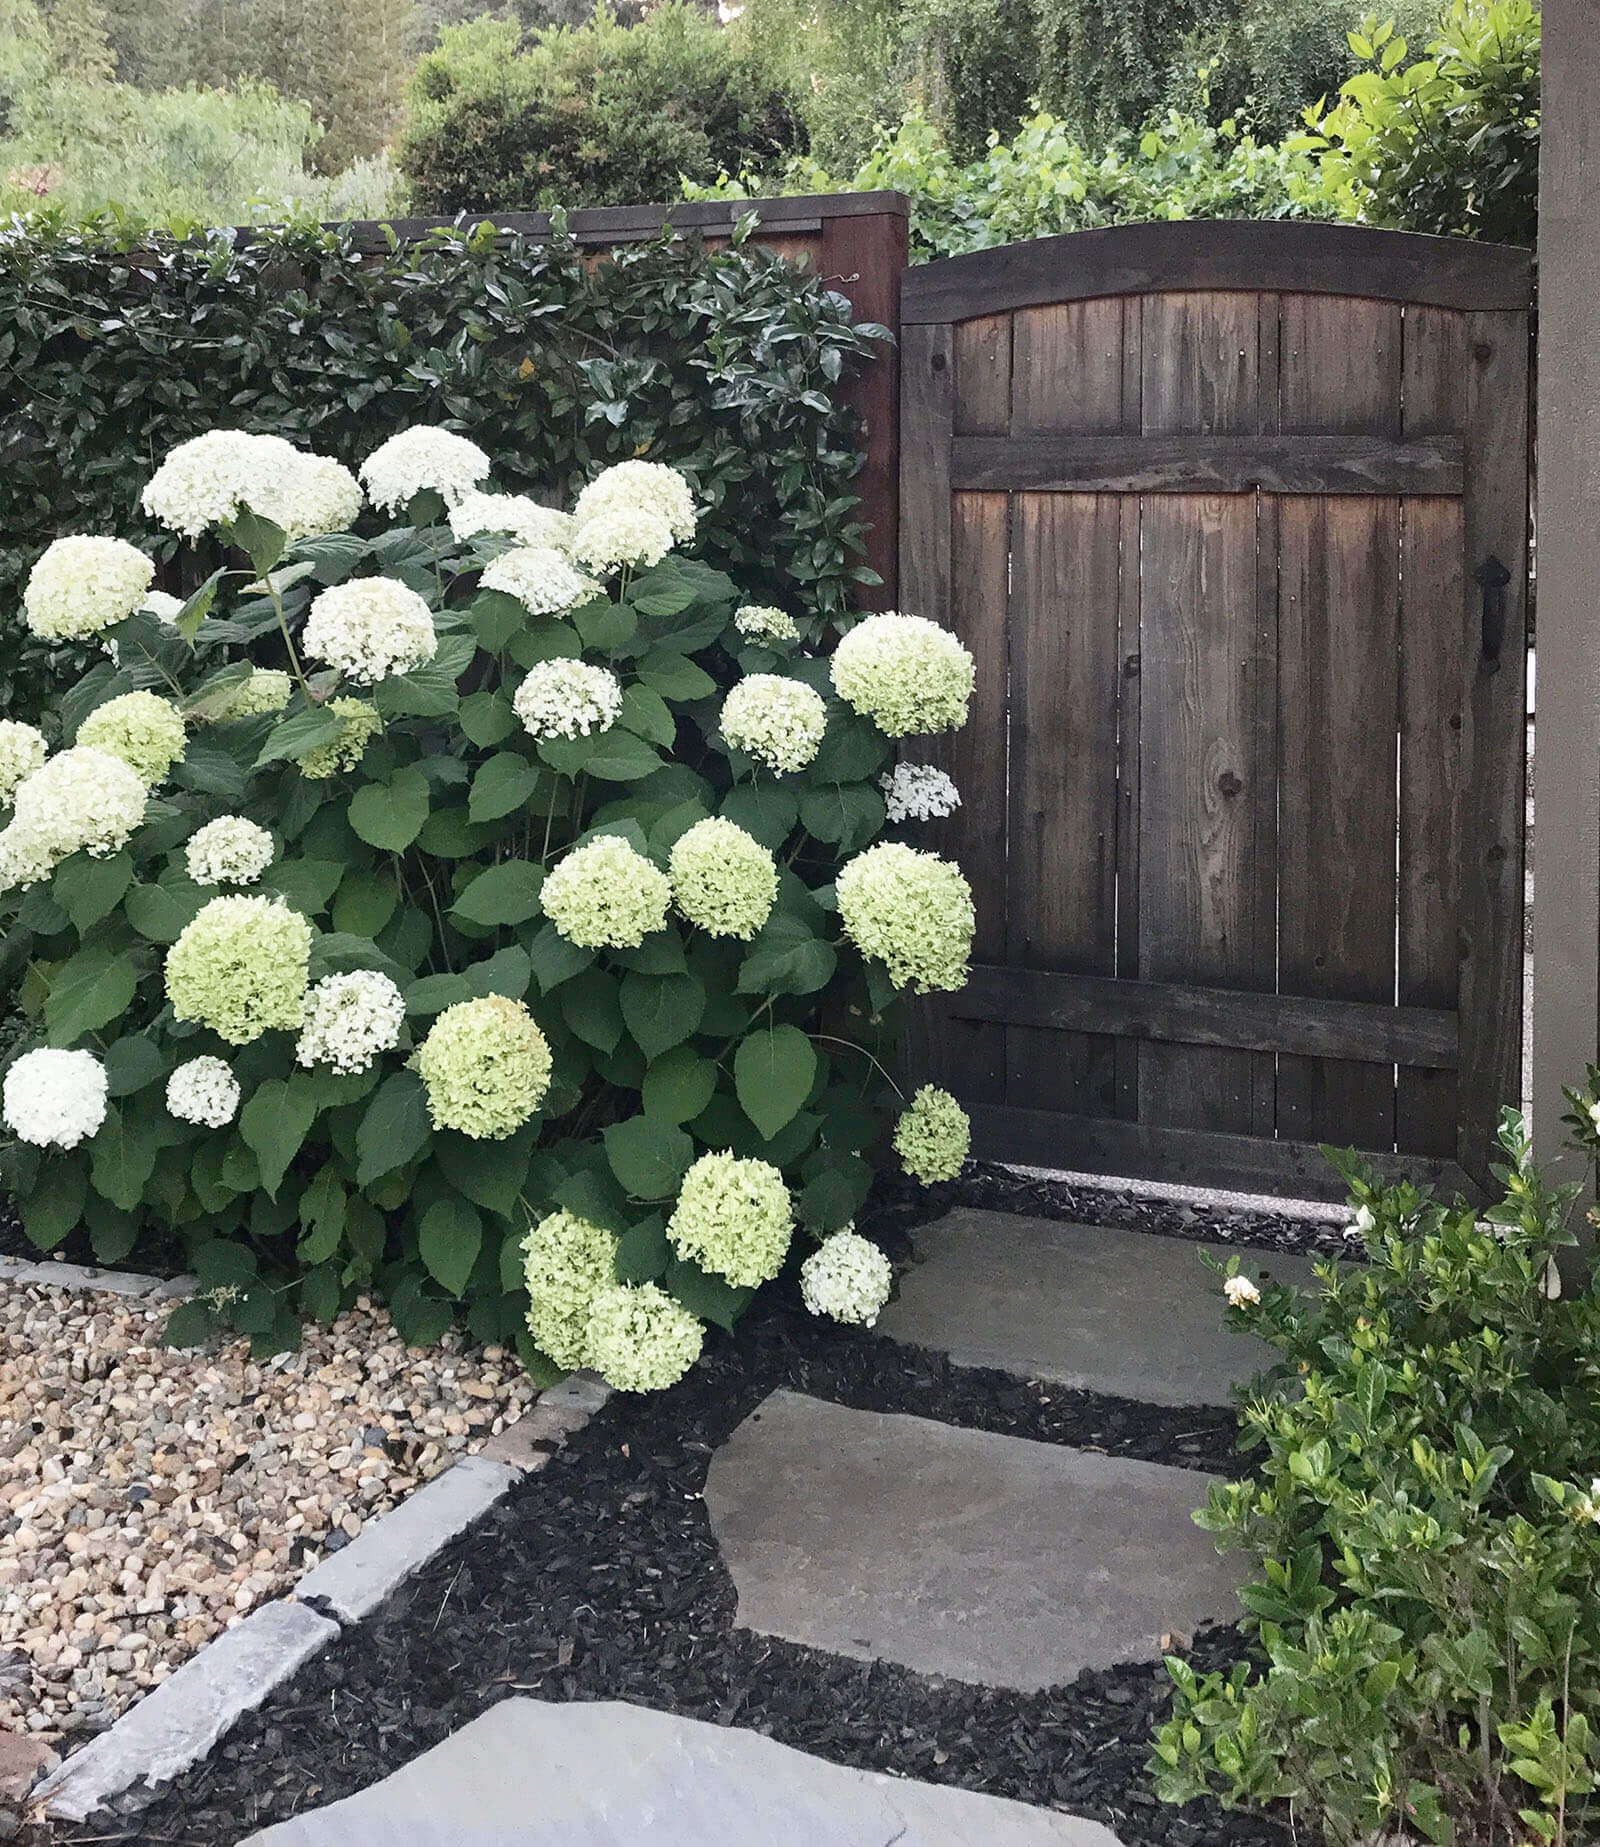 Rustic wooden gate entrance with hydrangeas and stone / gravel walkway